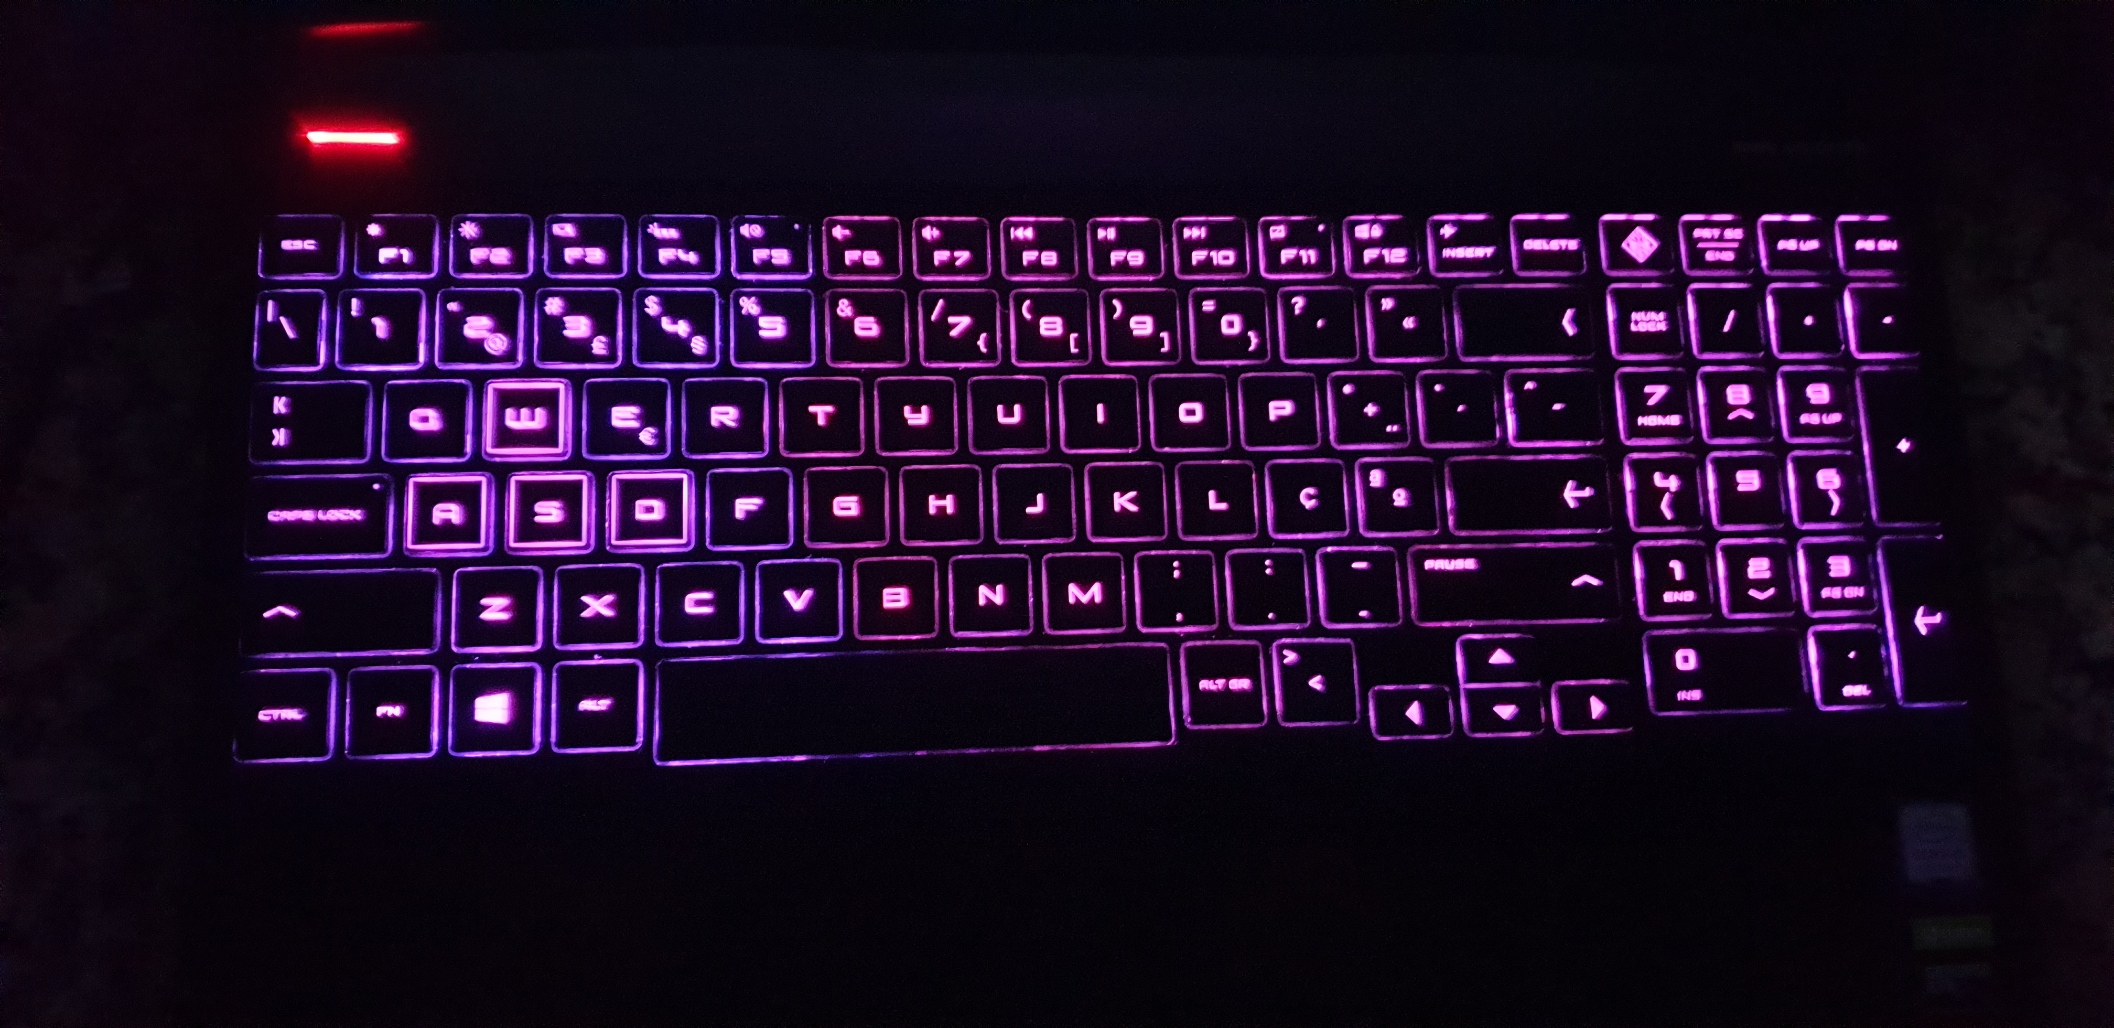 HP Omen 15 2018 RGB Keyboard light discoloration - HP Support Community -  7521877